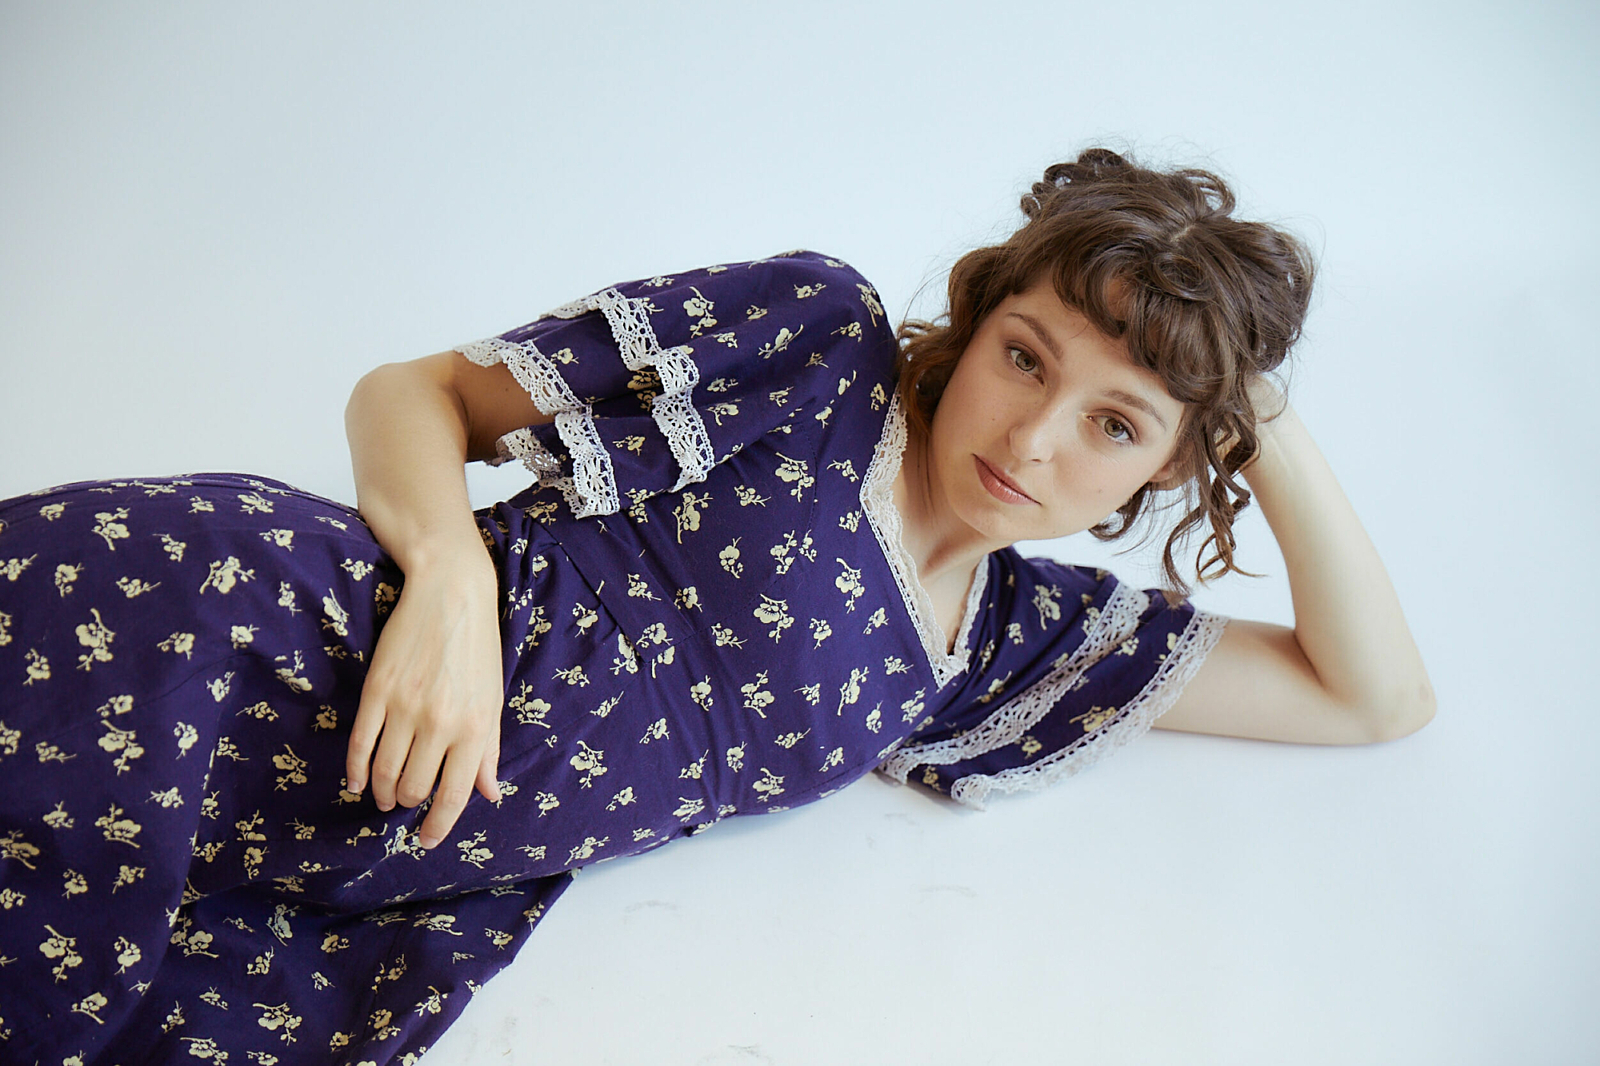 Stella Donnelly shares new single 'Flood'